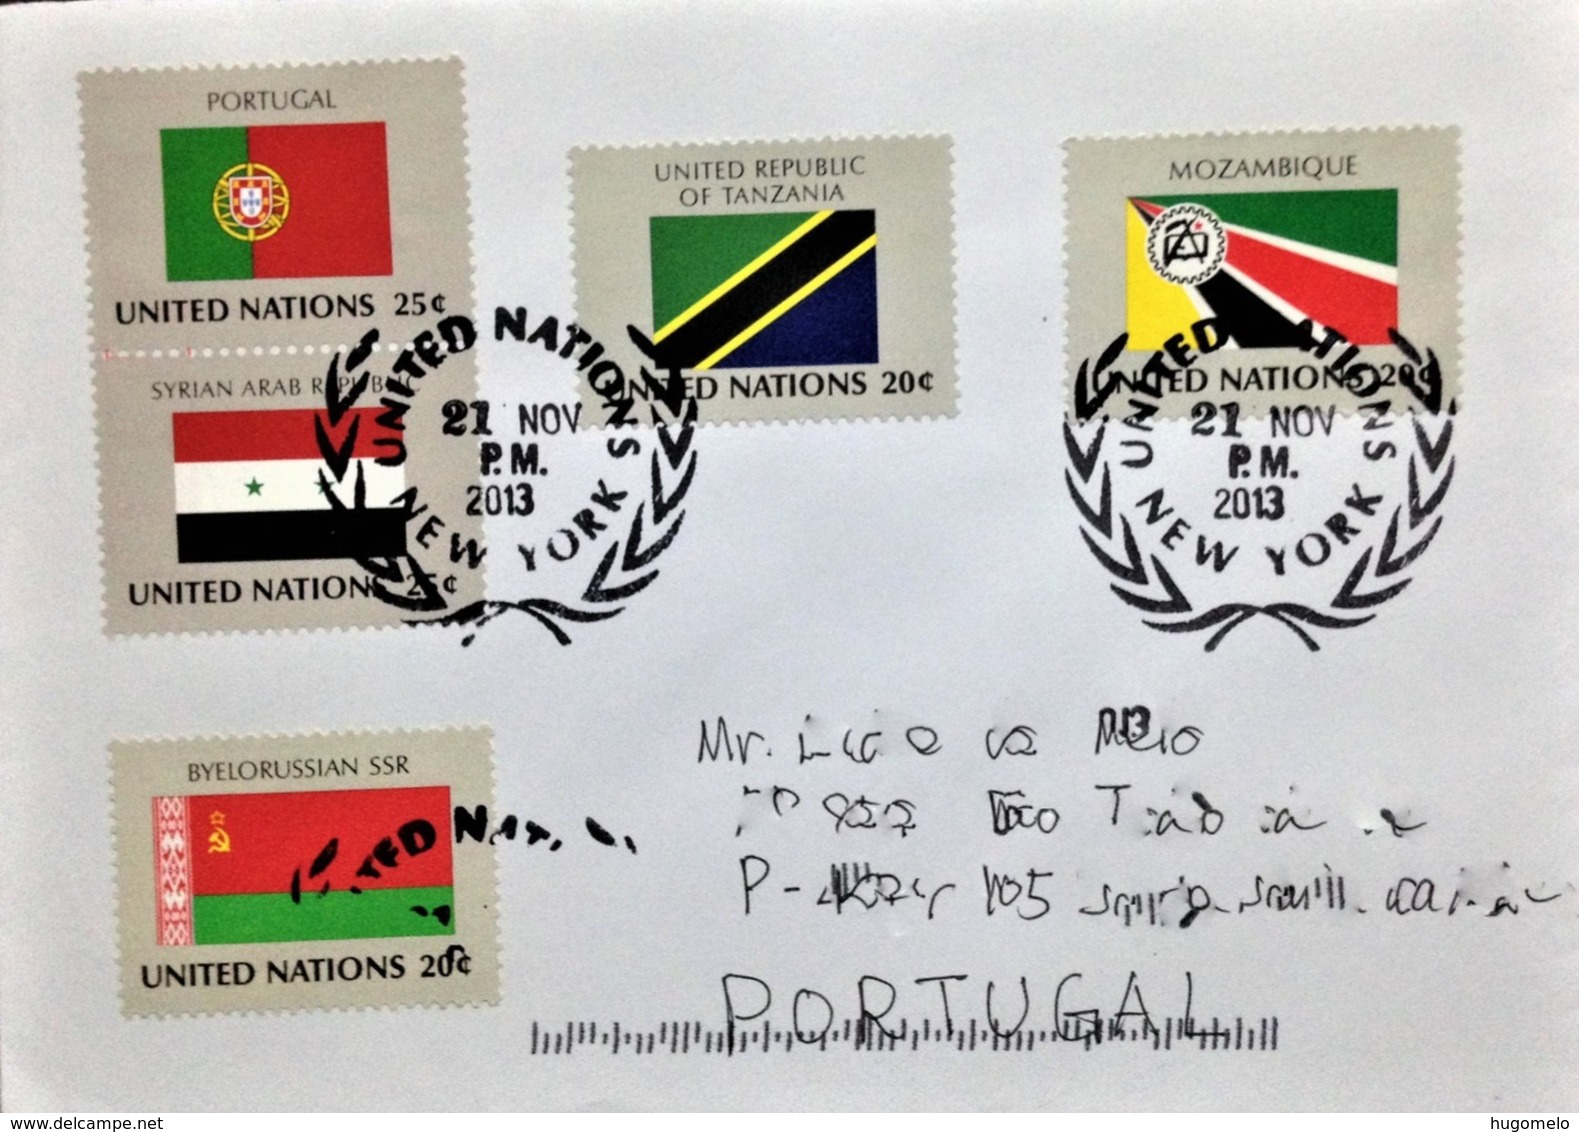 United Nations, Circulated Cover To Portugal, "FLAGS", Portugal, Syria, Byelorussia, Mozambique And Tanzania, 2013 - Brieven En Documenten